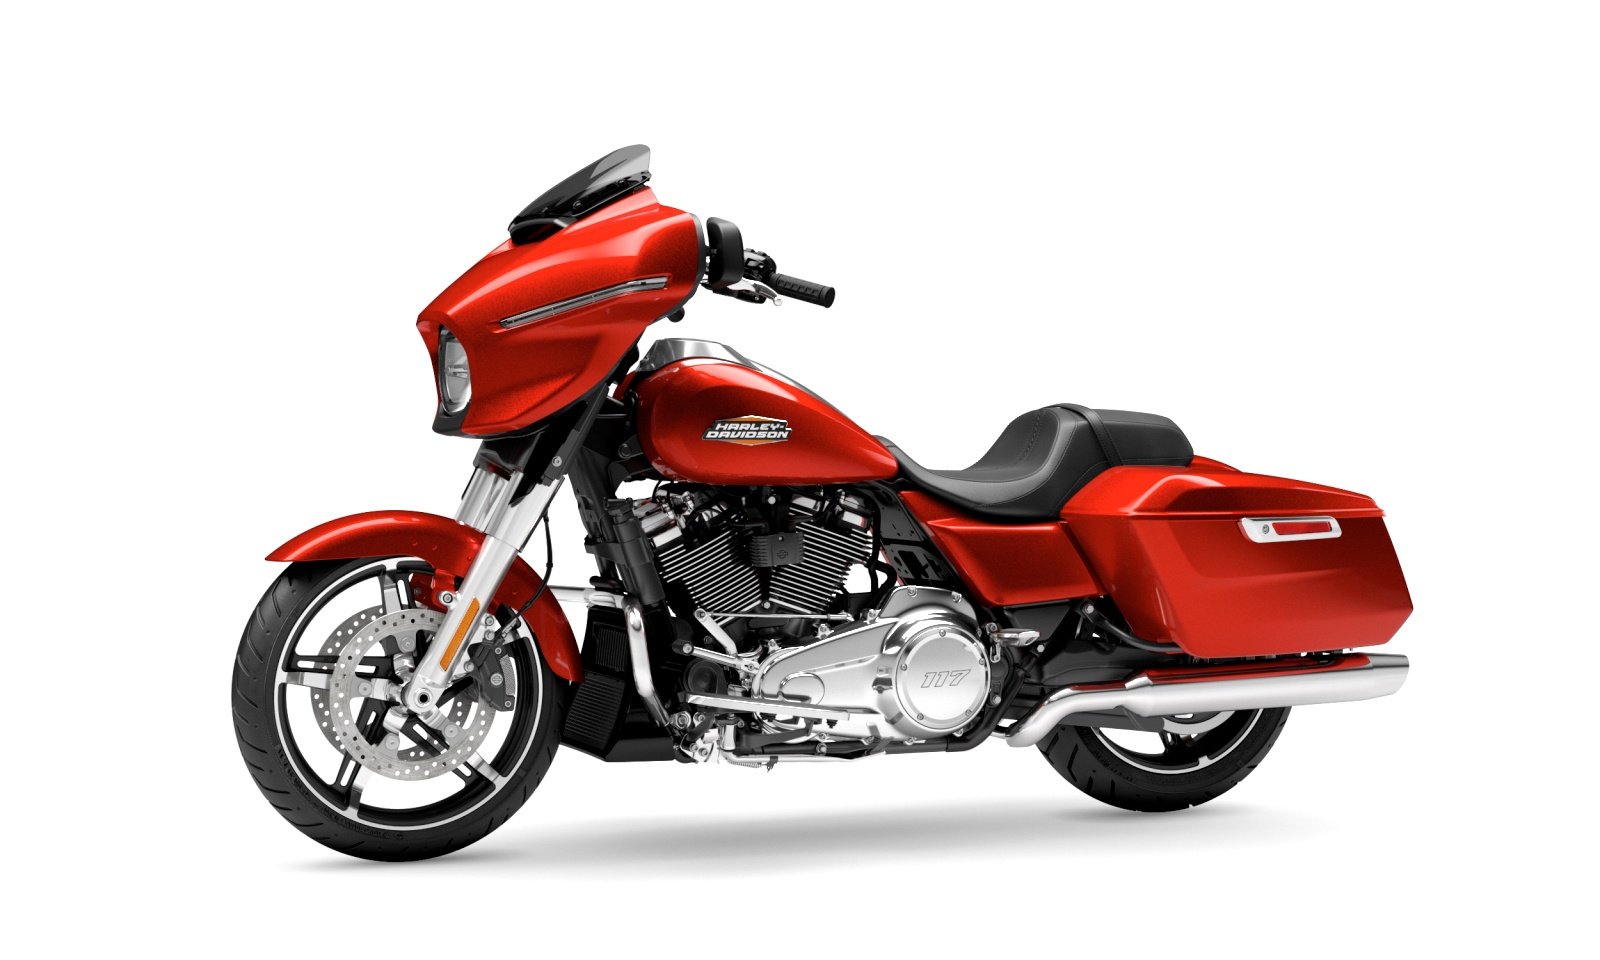 https://www.harley-davidson.com/content/dam/h-d/images/product-images/bikes/motorcycle/2024/2024-street-glide/2024-street-glide-m12/360/2024-street-glide-m12-motorcycle-08.jpg?impolicy=myresize&rw=1600